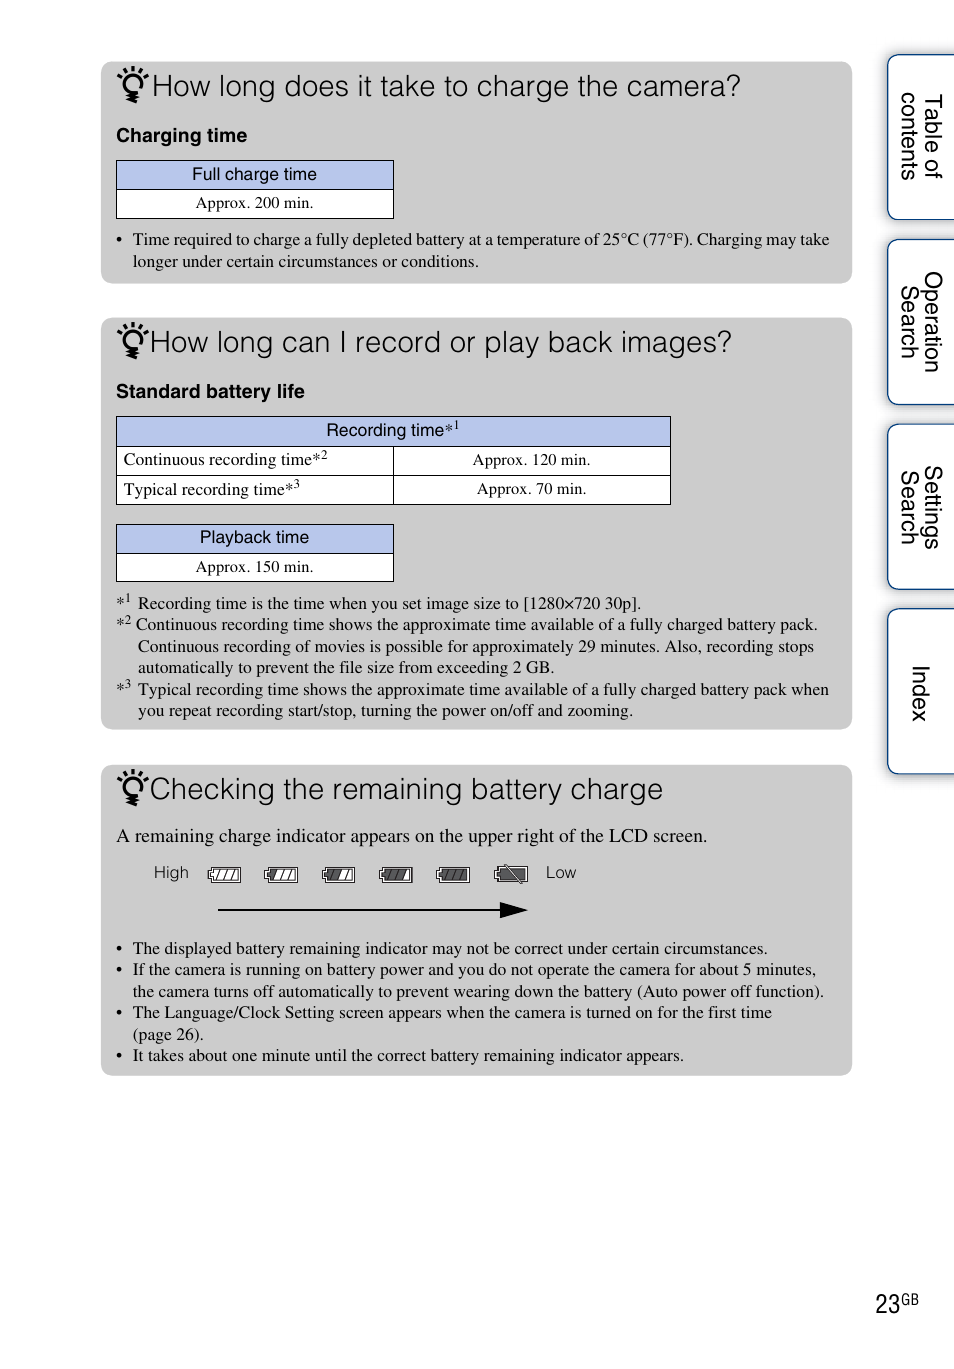 How long does it take to charge the camera, How long can i record or play back images, Checking the remaining battery charge | Sony bloggie MHS-TS20К User Manual | Page 23 / 73